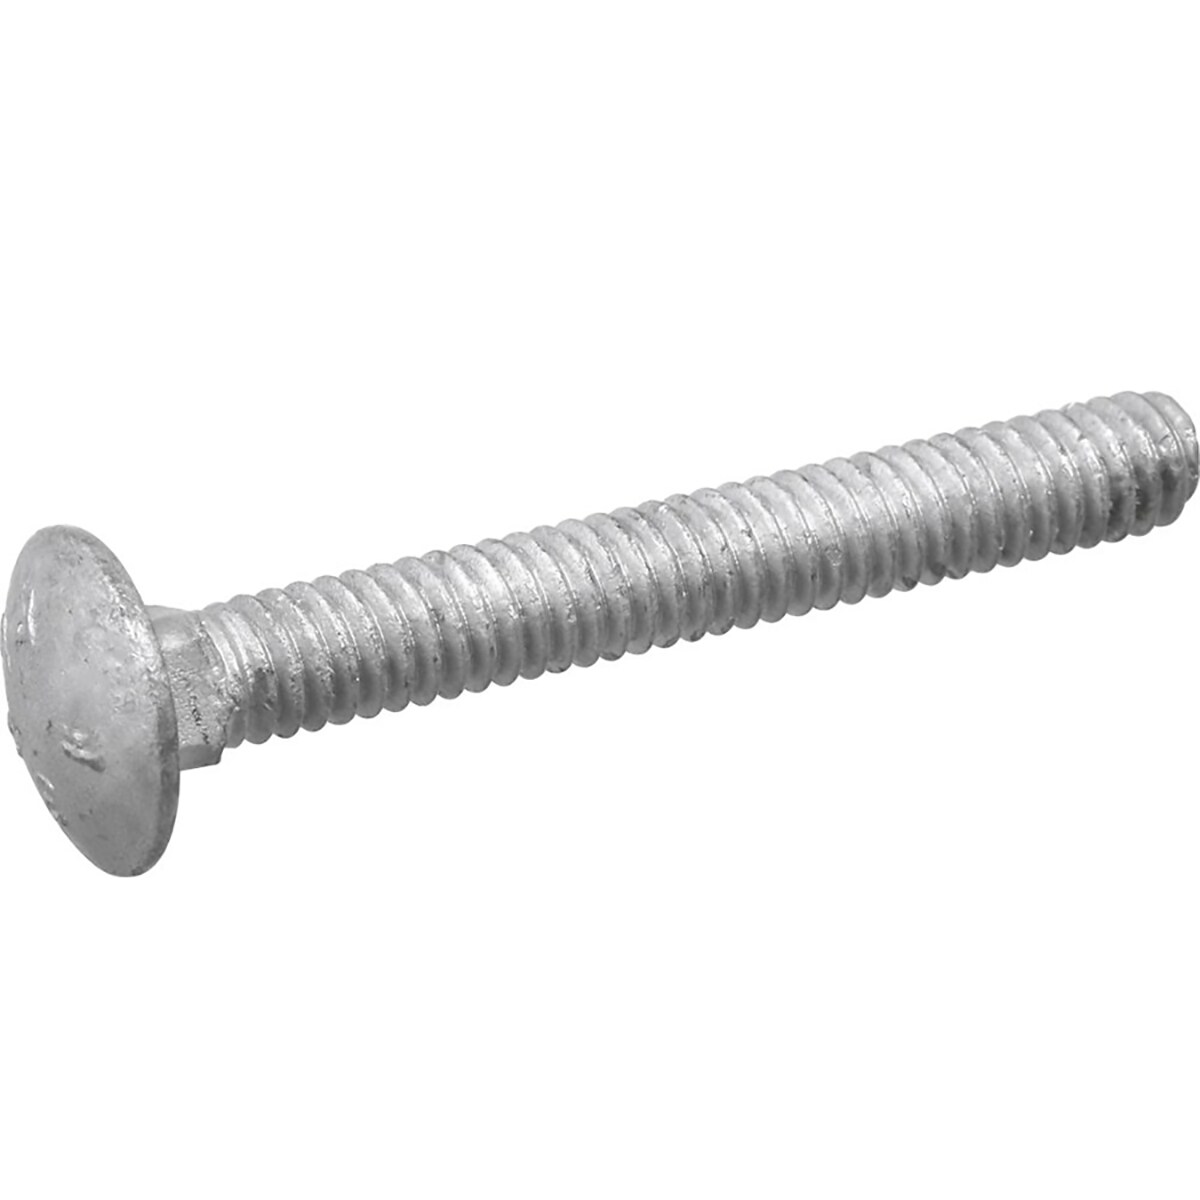 3/8"-16 x 4" Coarse Thread Carriage Bolt Stainless Steel 18-8 